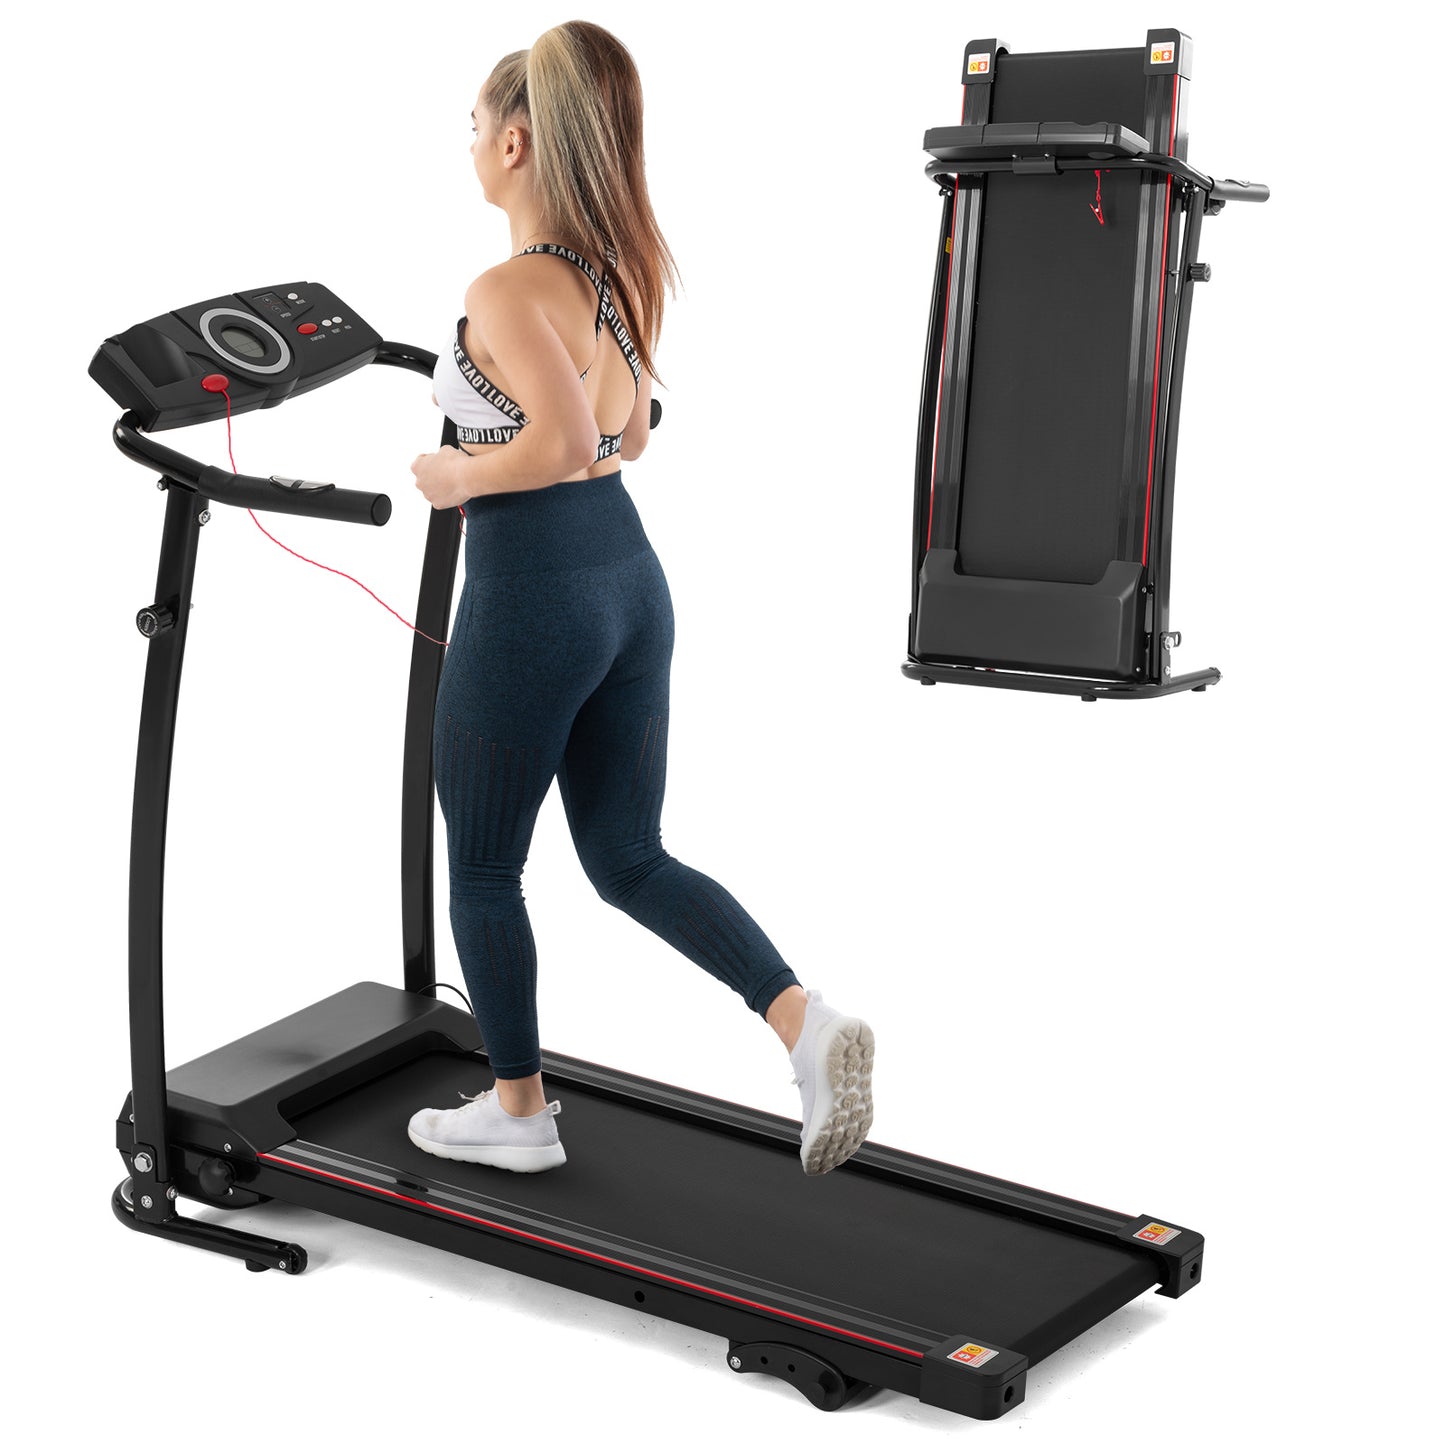 FYC 2.25HP Folding Treadmills for Home - 265 LBS Weight Capacity Electric Treadmill, Easy Assemble with Incline/LCD Display, Portable Running Walking Workout for Home Gym Saver Space